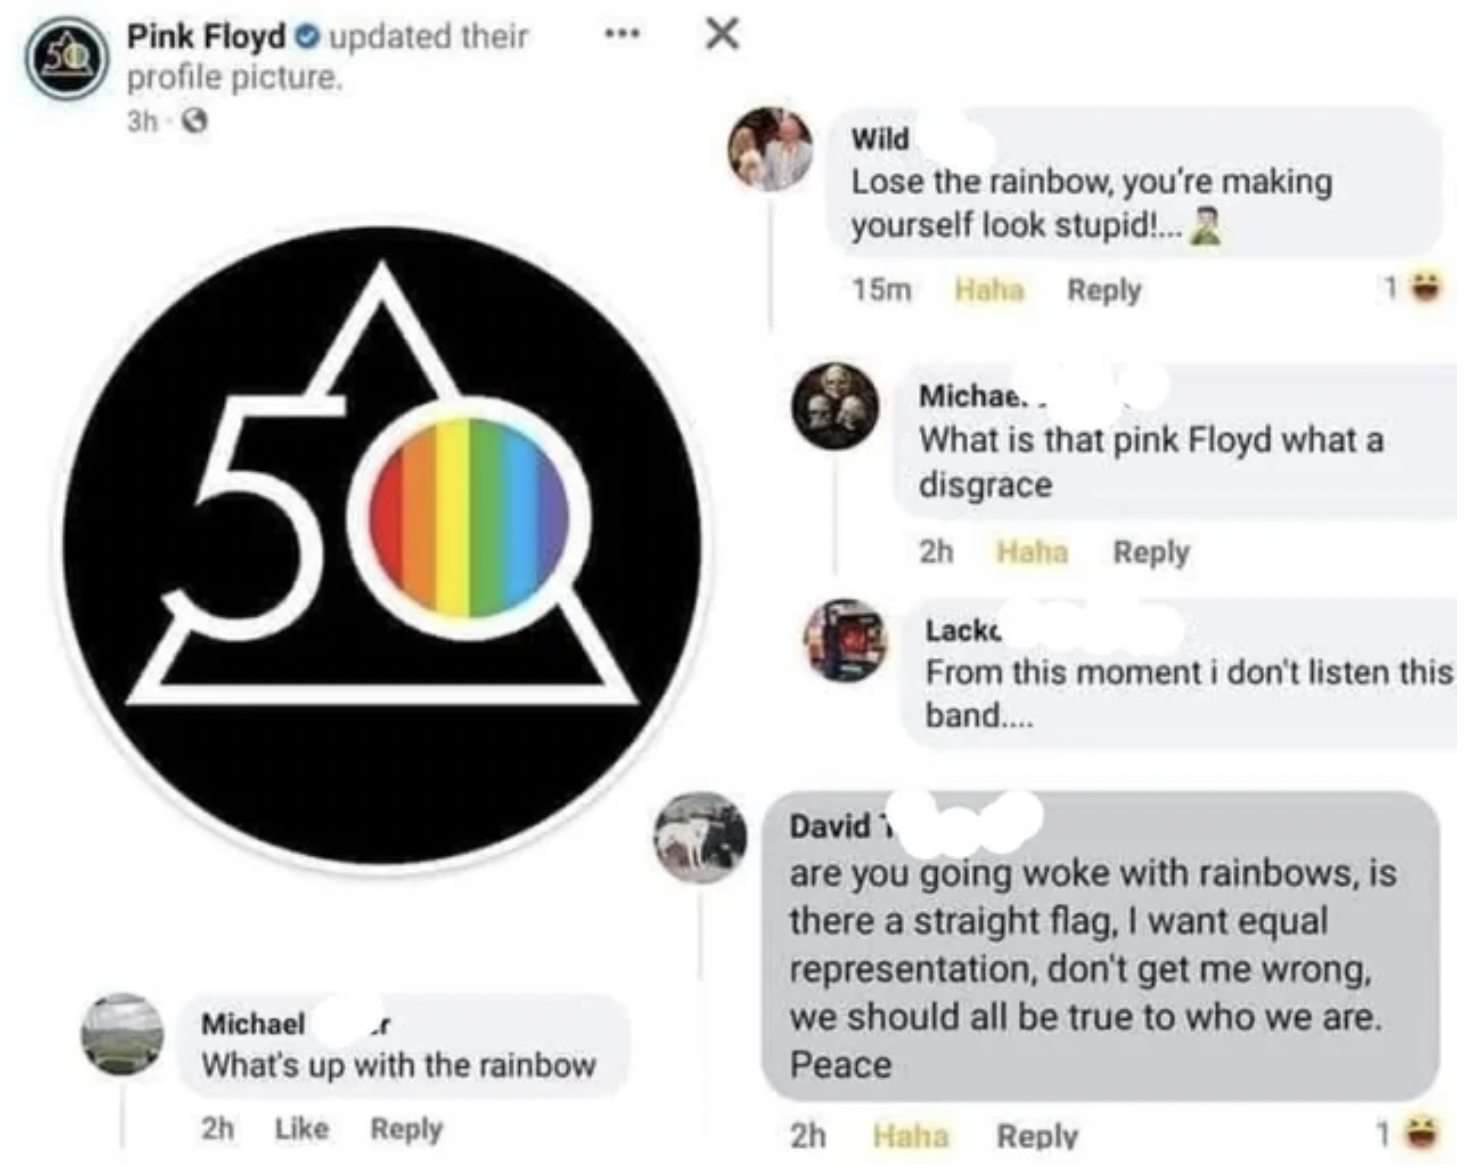 Facepalms - Pink Floyd - Pink Floyd updated their profile picture.